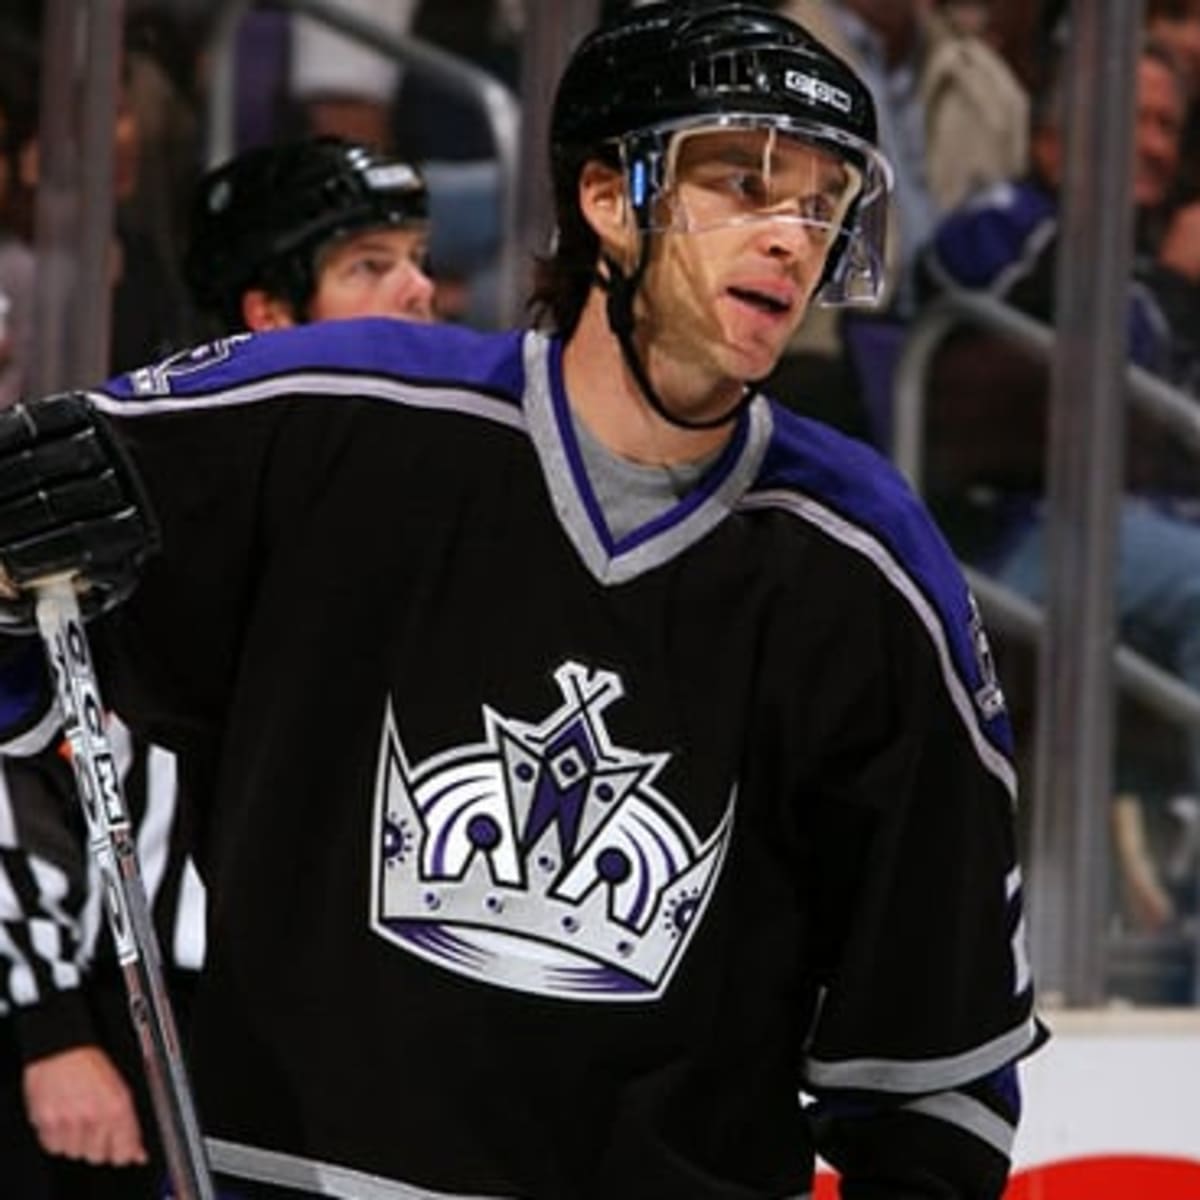 LA Kings Luc Robitaille Officially Becomes One Of The All-Time Greats